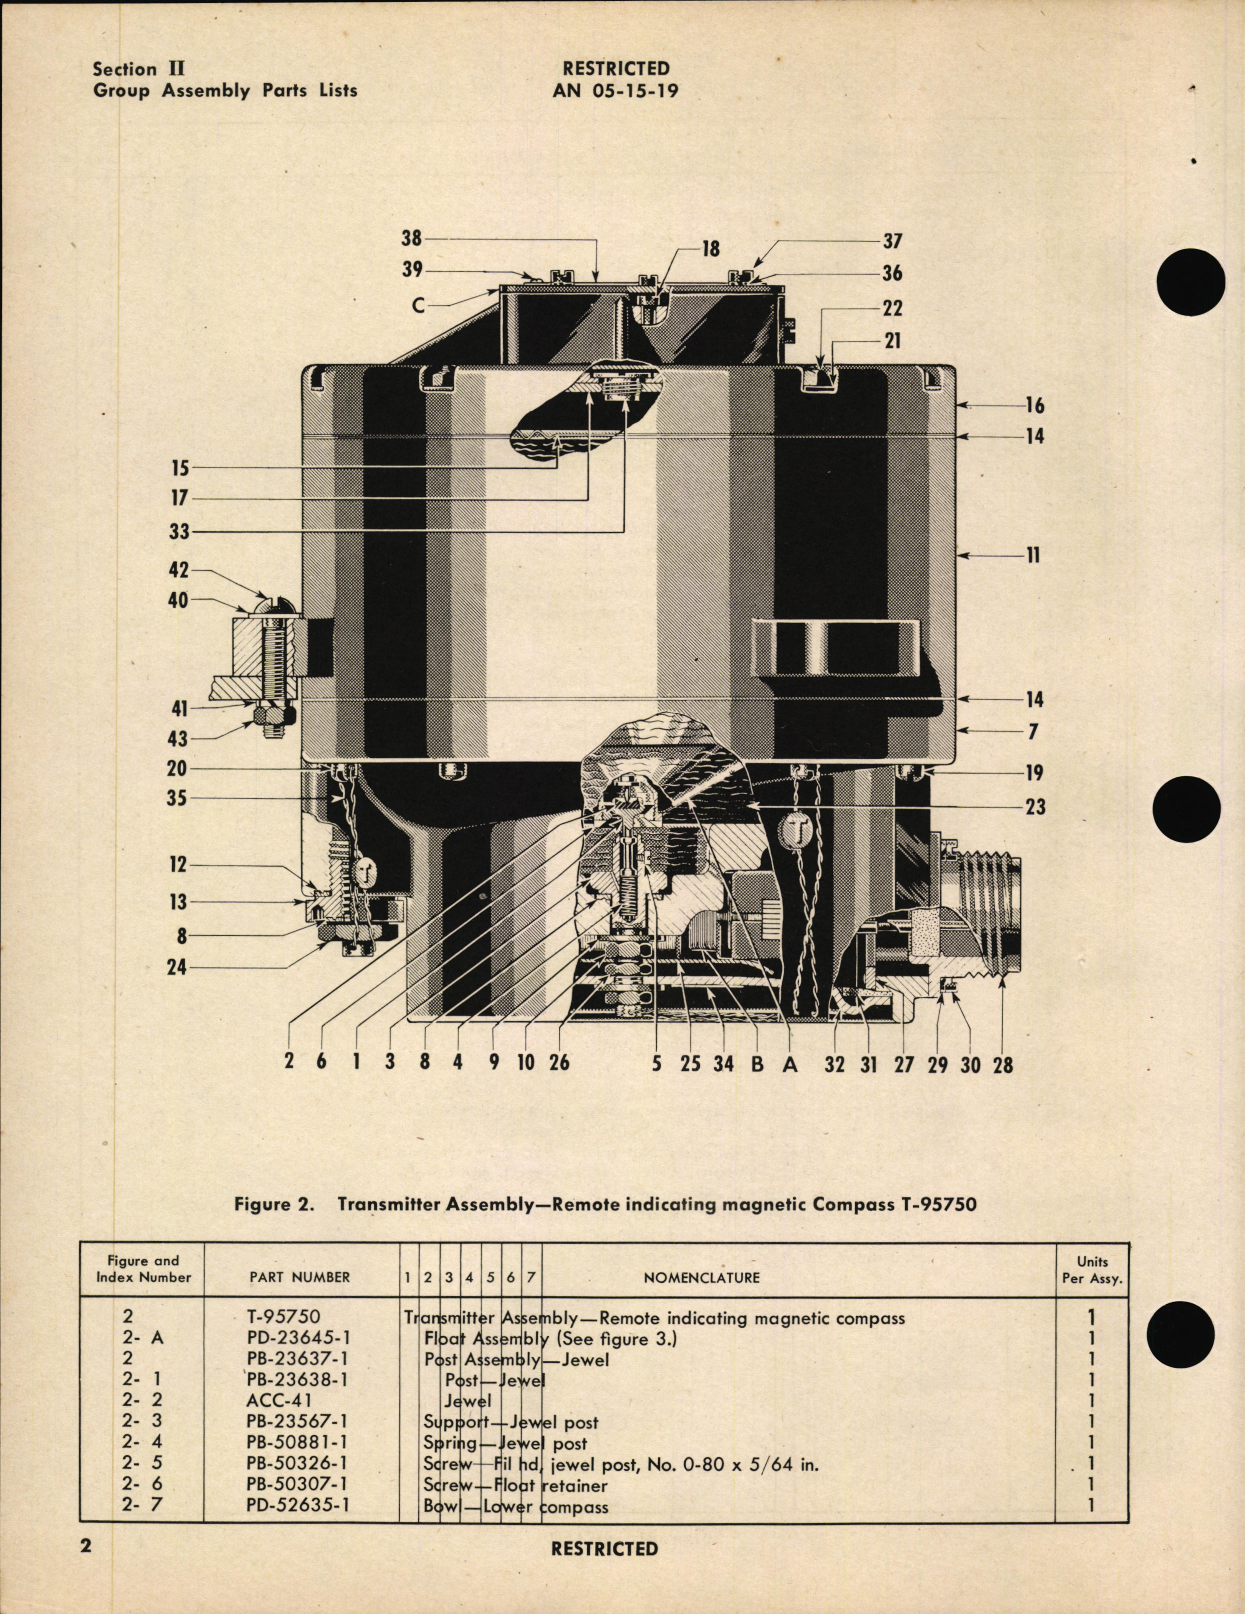 Sample page 6 from AirCorps Library document: Parts Catalog for Remote Indicating Magnetic Compass